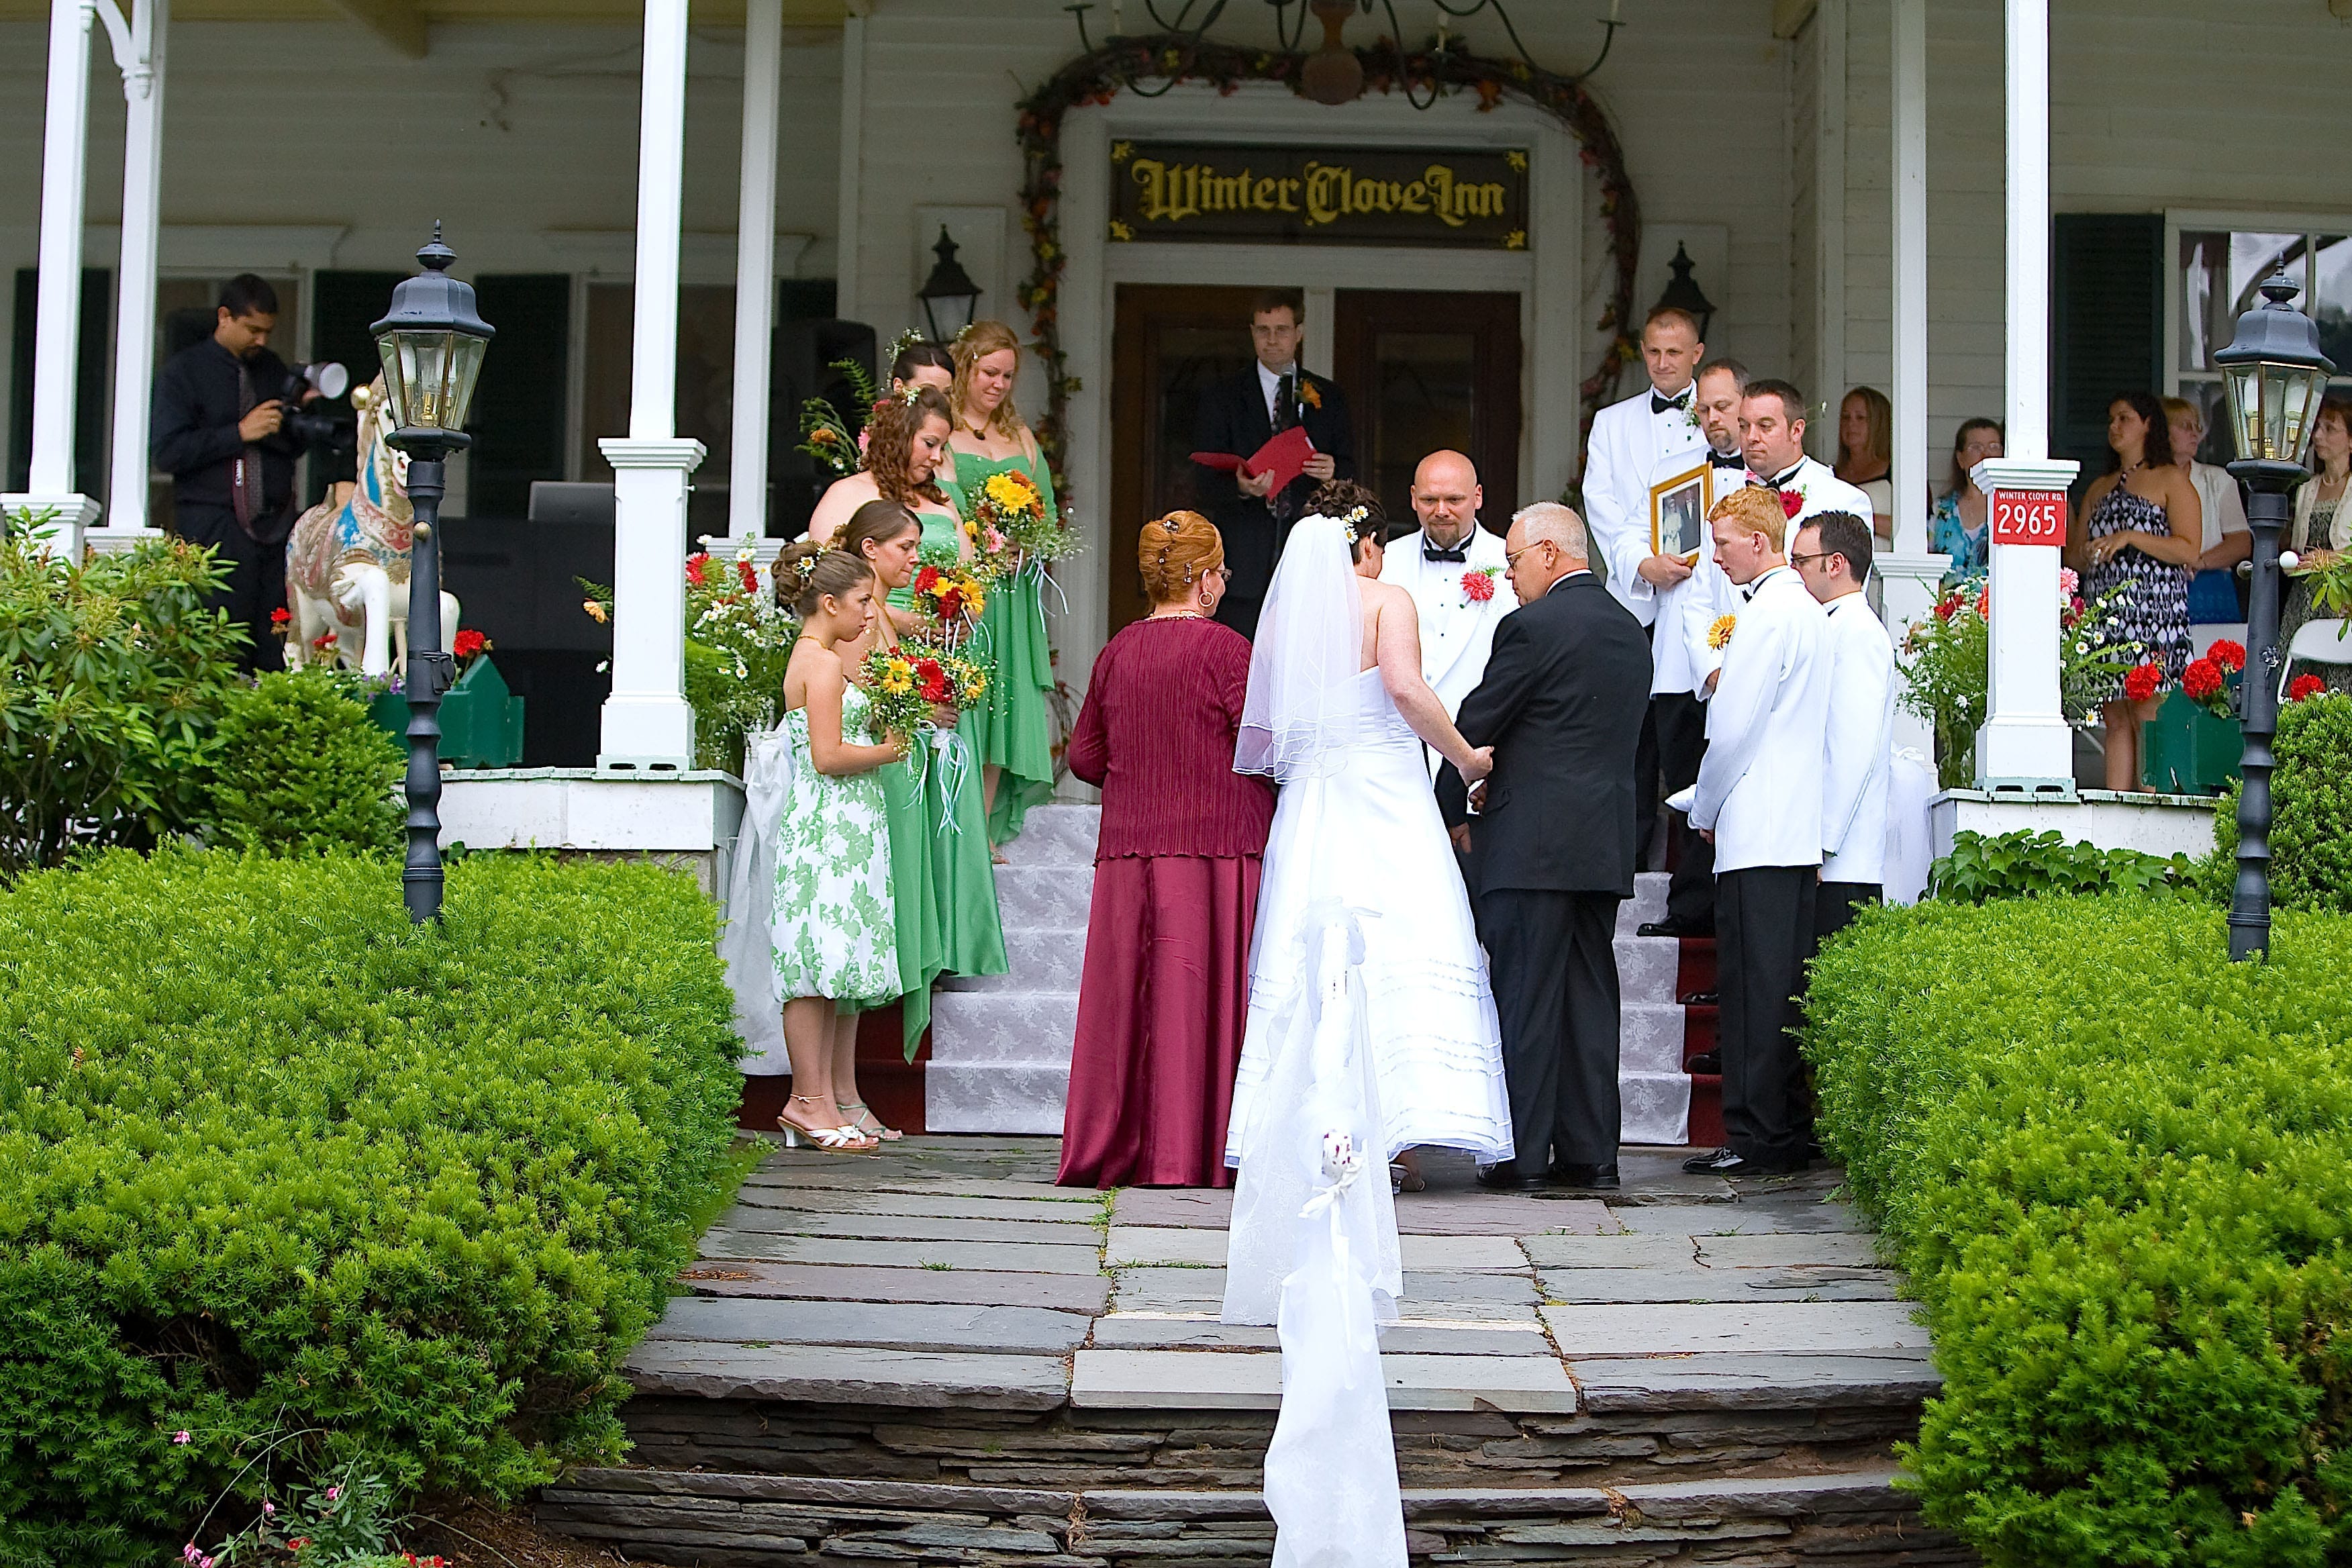 Wedding ceremony on front steps of the Inn.